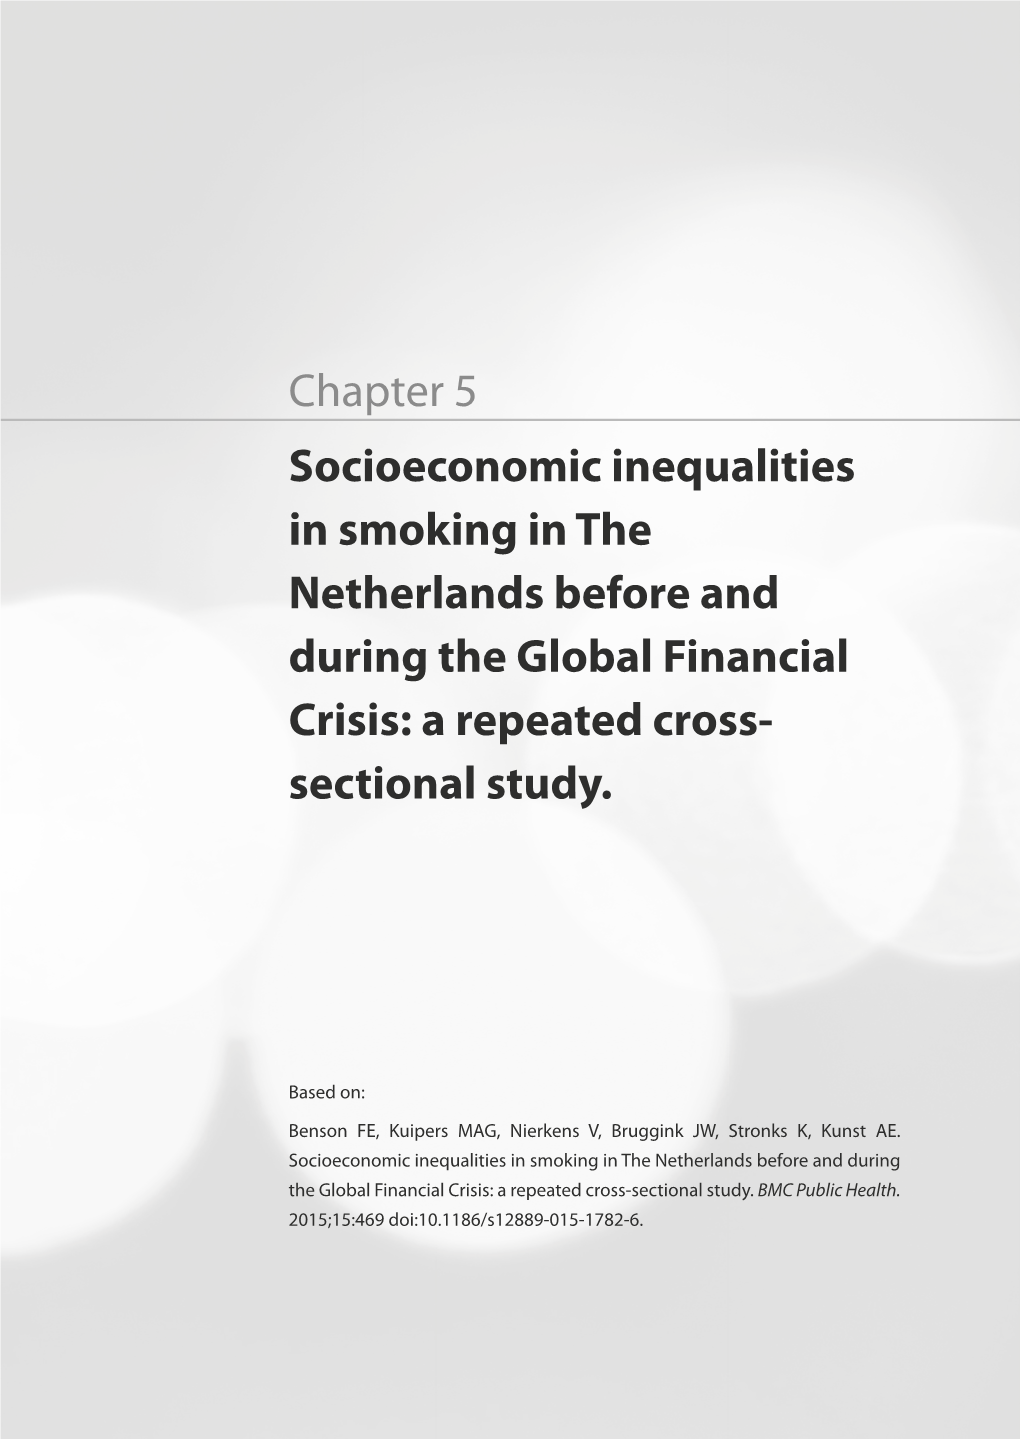 Socioeconomic Inequalities in Smoking in the Netherlands Before and During the Global Financial Crisis: a Repeated Cross- Sectional Study